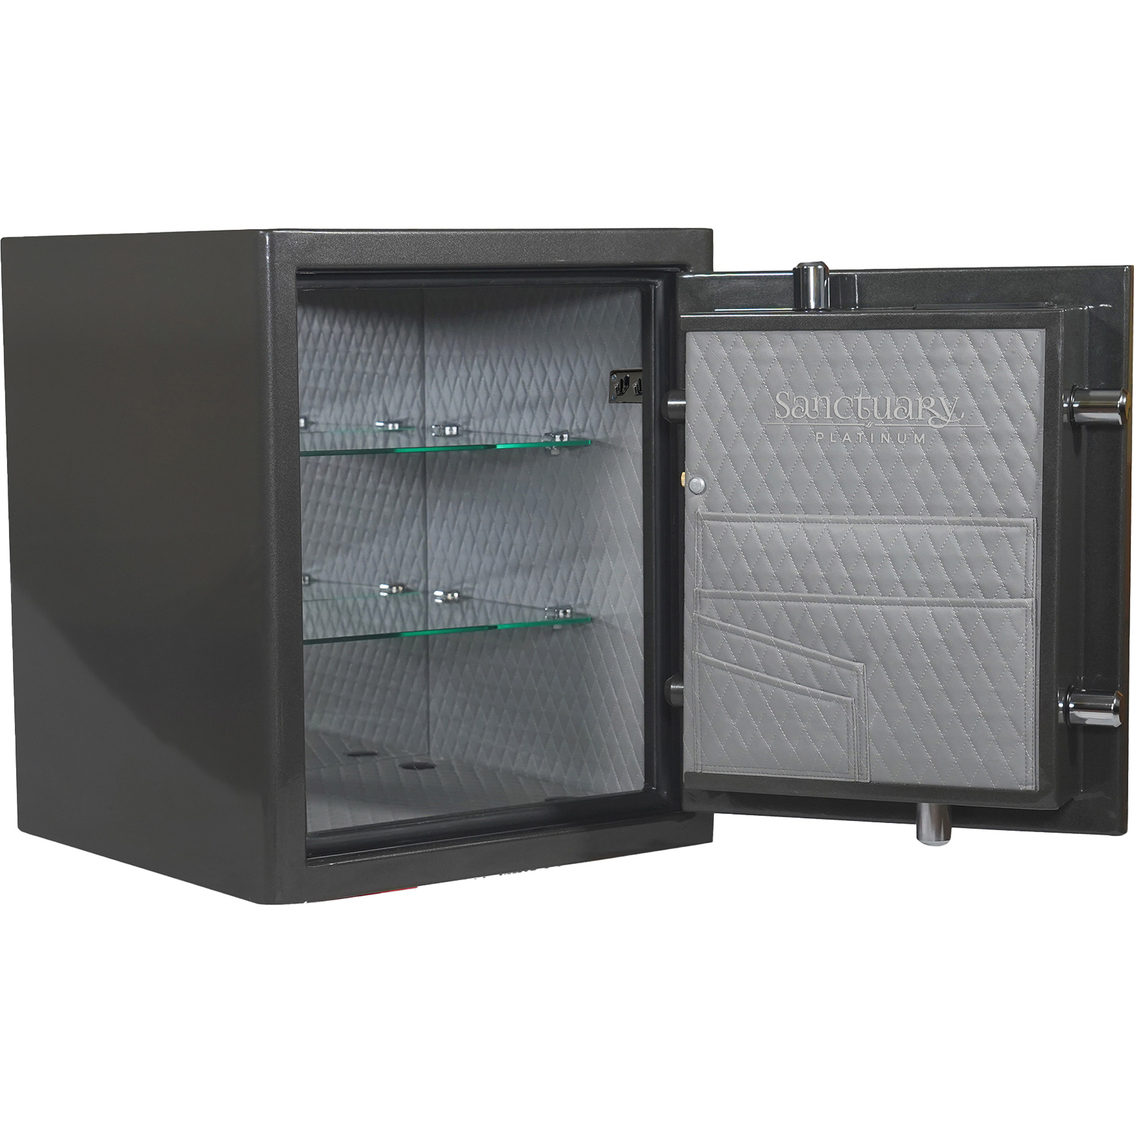 Sports Afield Sports Afield Sanctuary 23 in. Tall Safe with Biometric Lock - Image 2 of 6